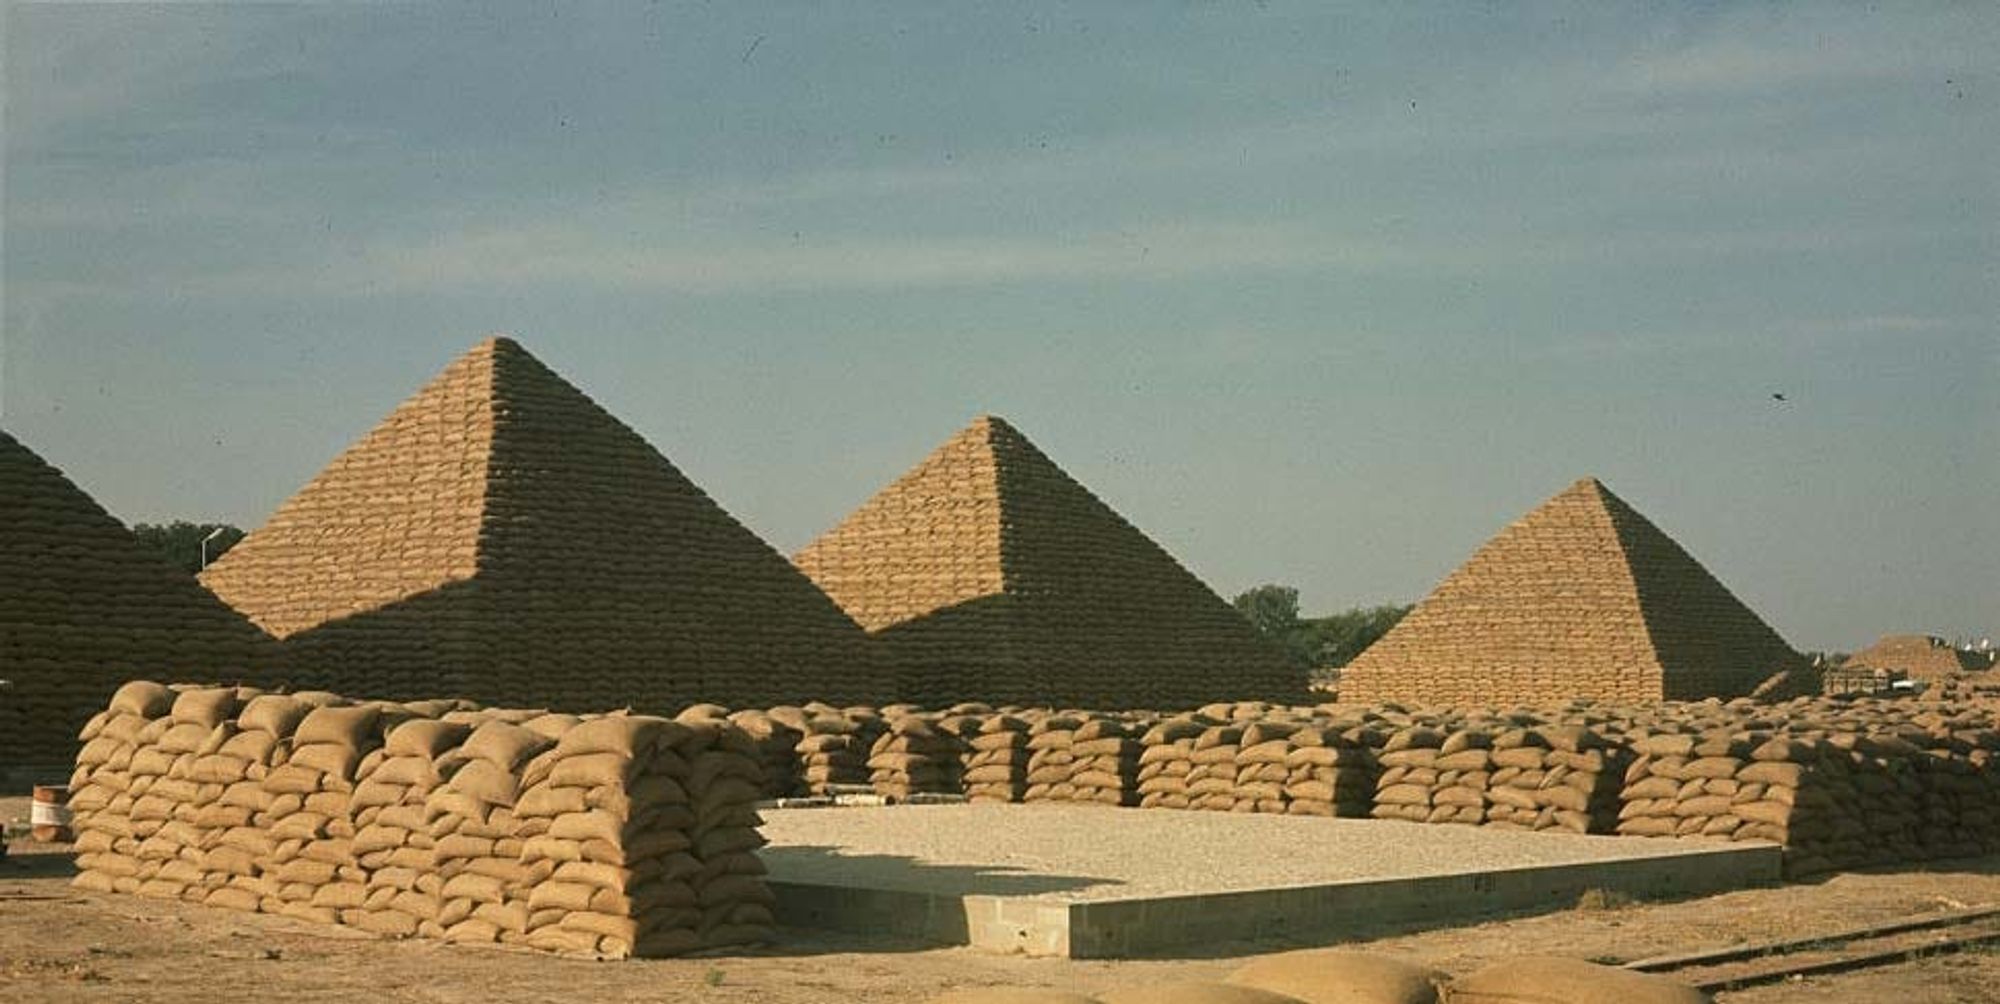 Groundnut production in Nigeria: Will the Groundnut pyramids of Kano be back?